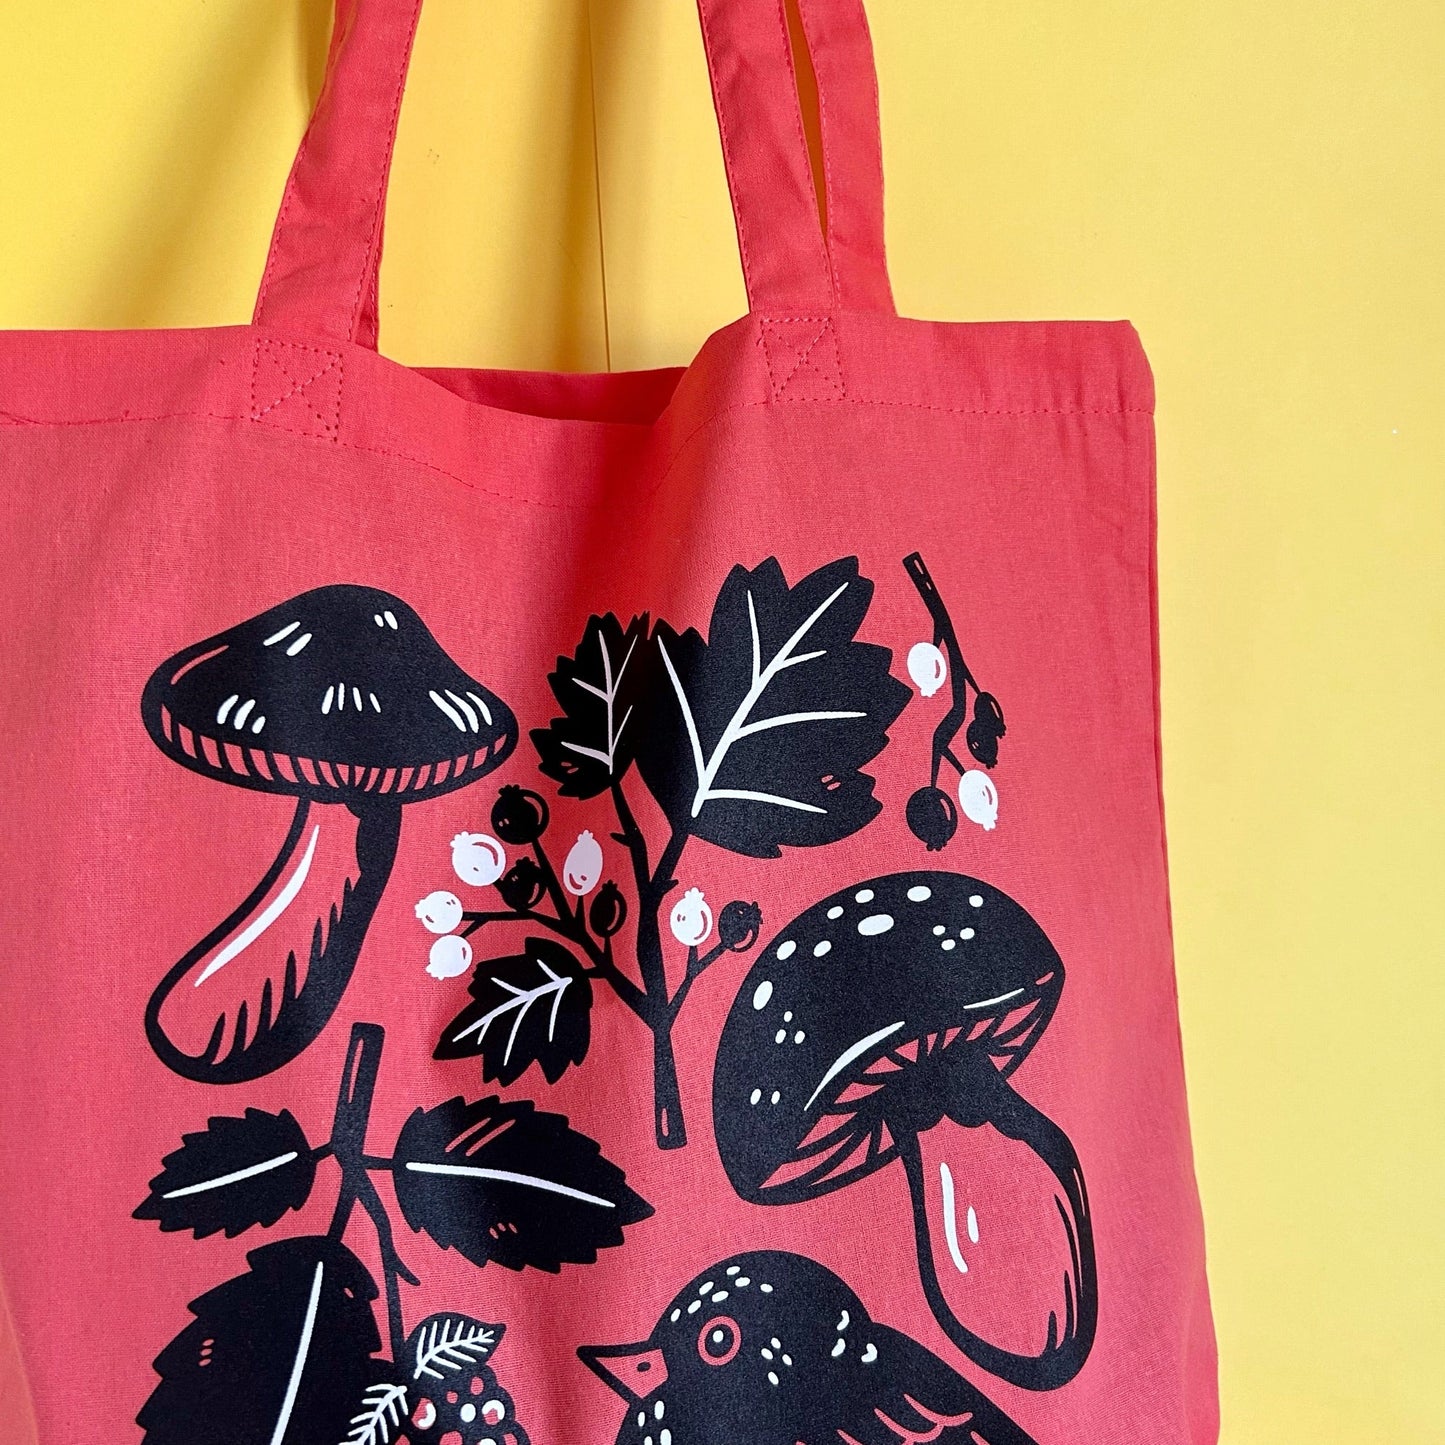 SECONDS Blackbird Tote Bag in Coral Red